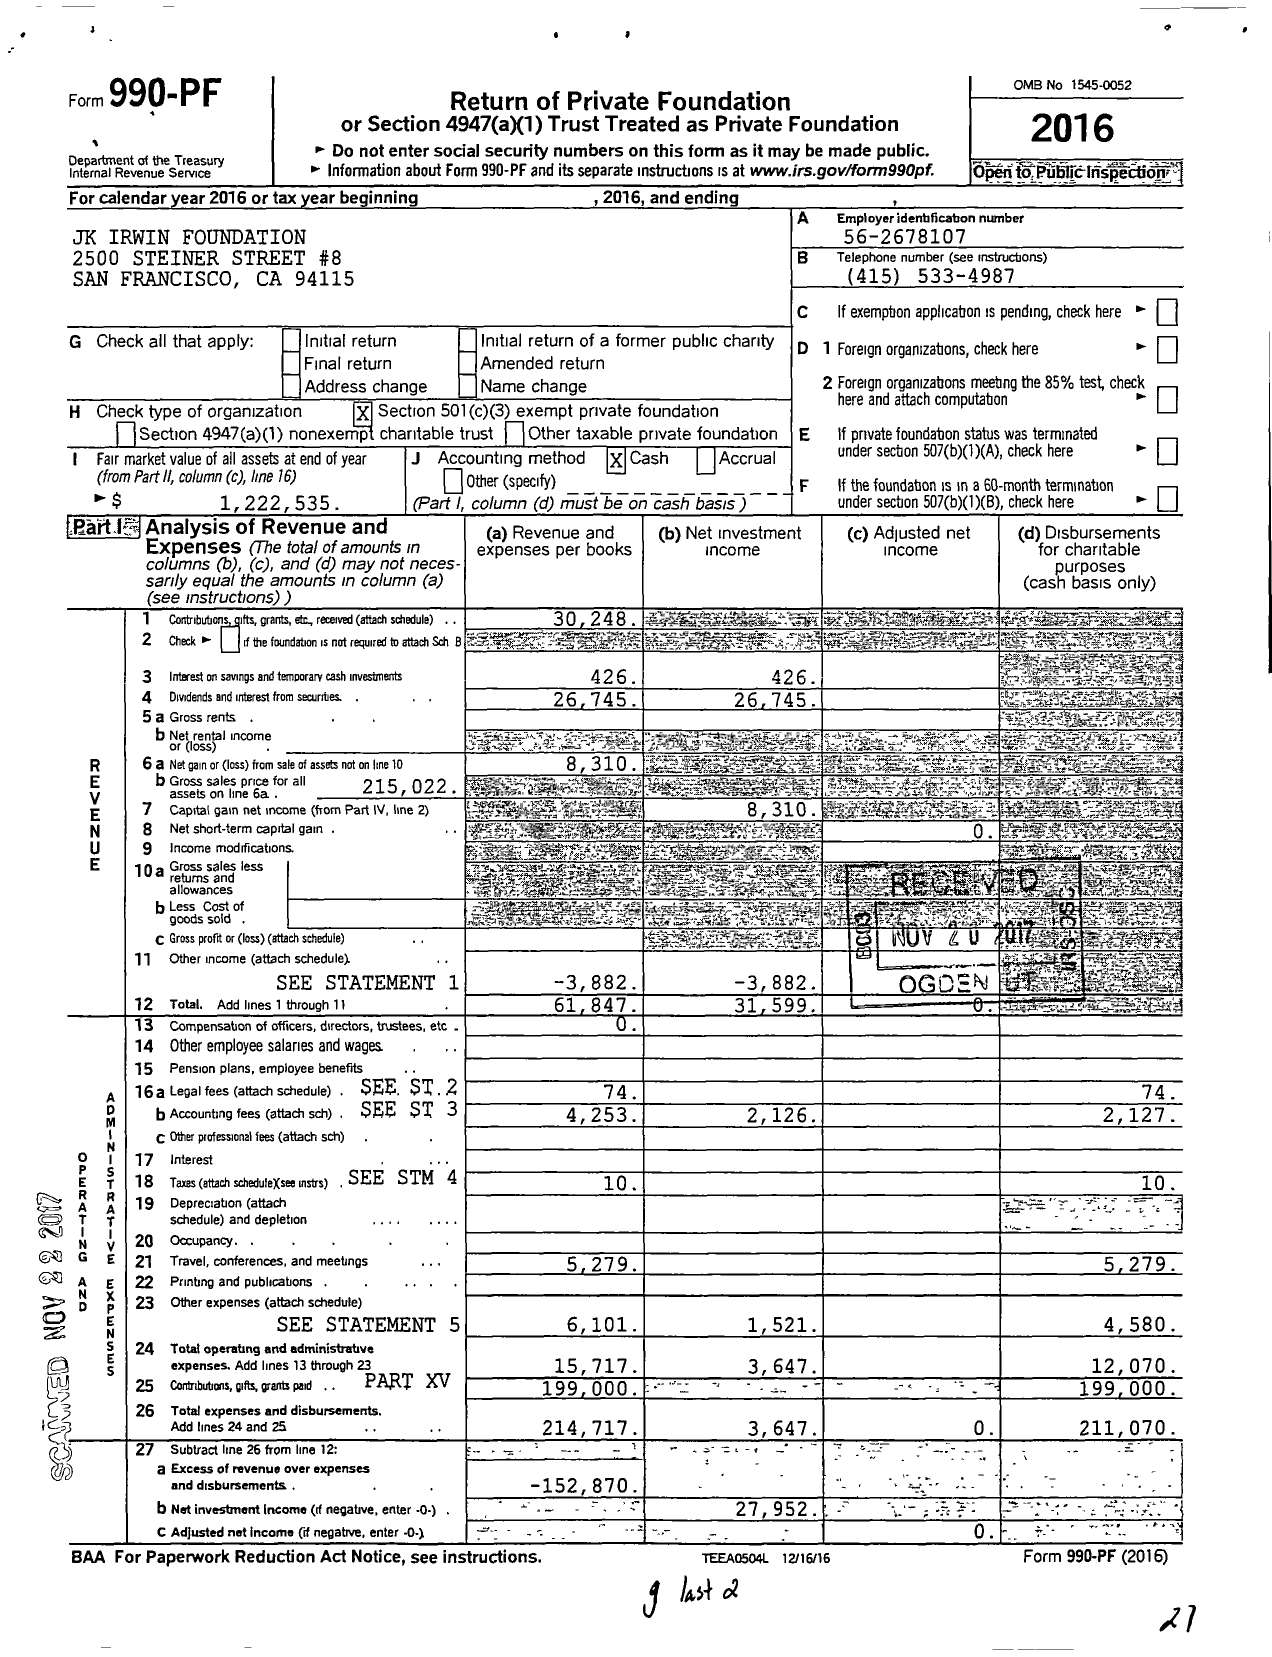 Image of first page of 2016 Form 990PF for JK Irwin Foundation